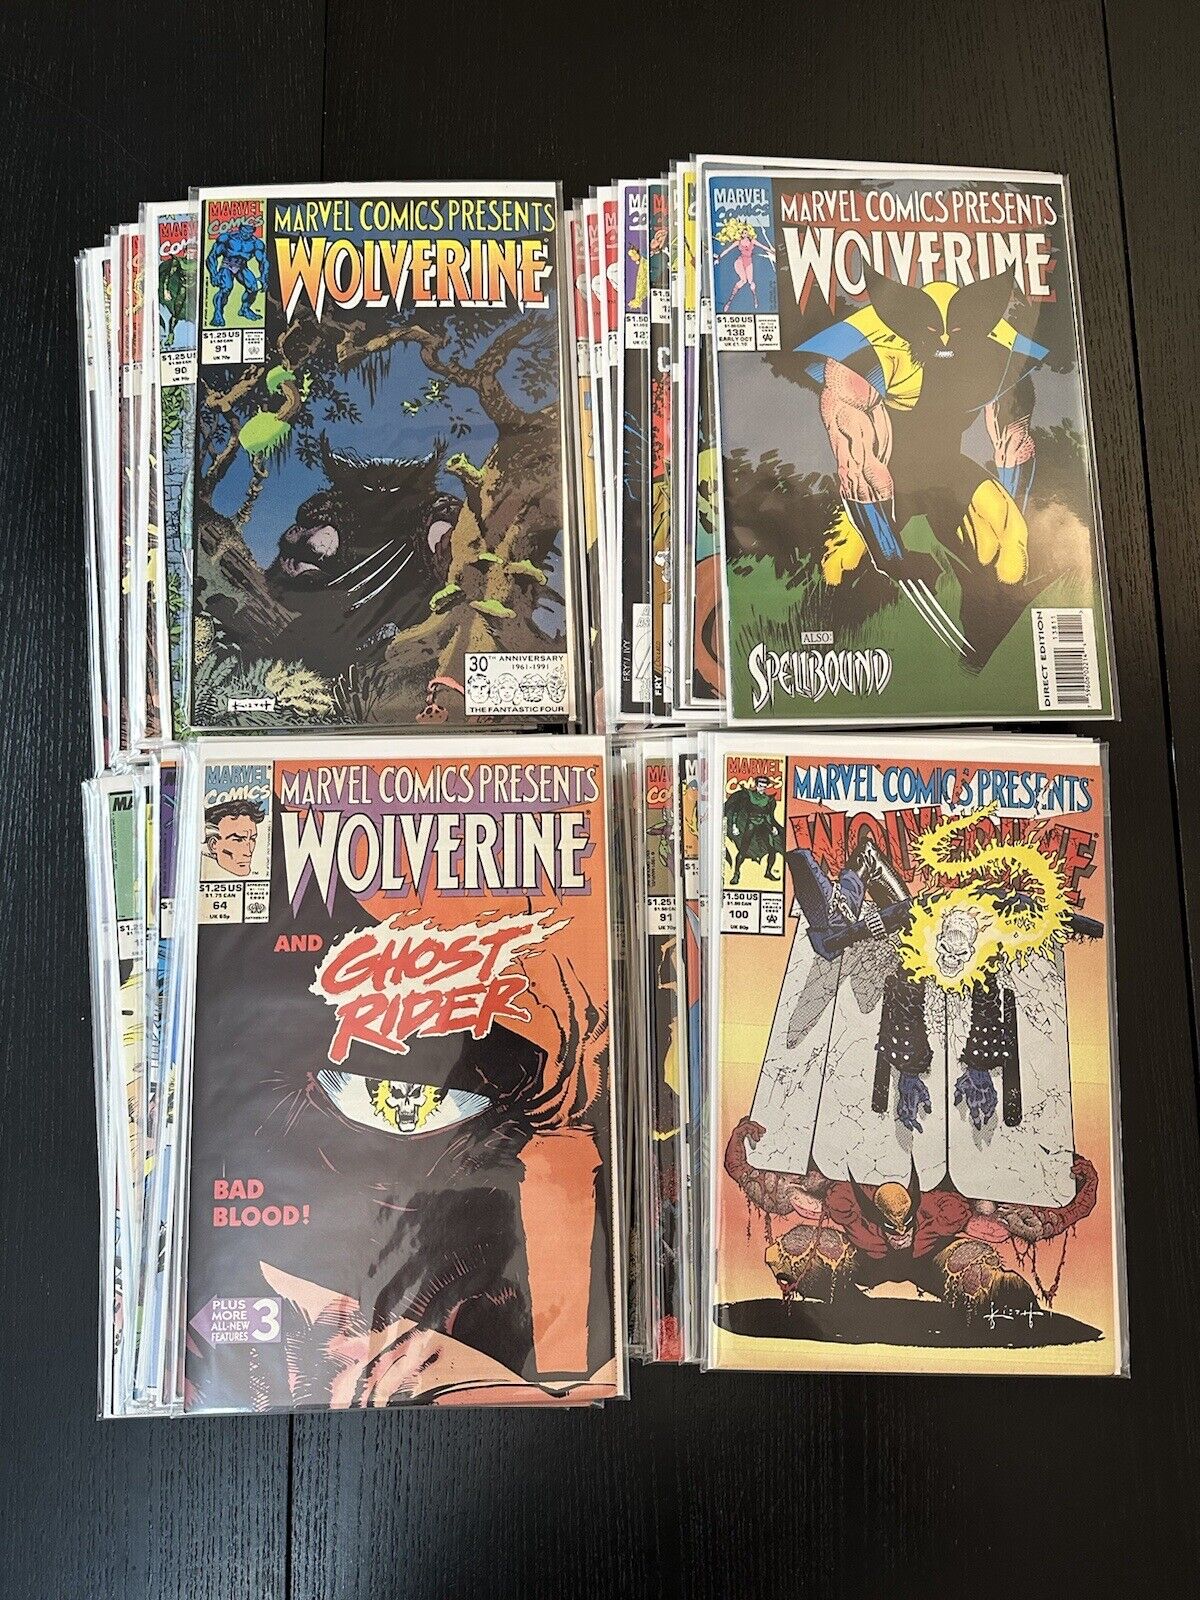 HUGE LOT OF 55 Marvel Comics Presents Comic Books Sleeved & Boarded Wolverine